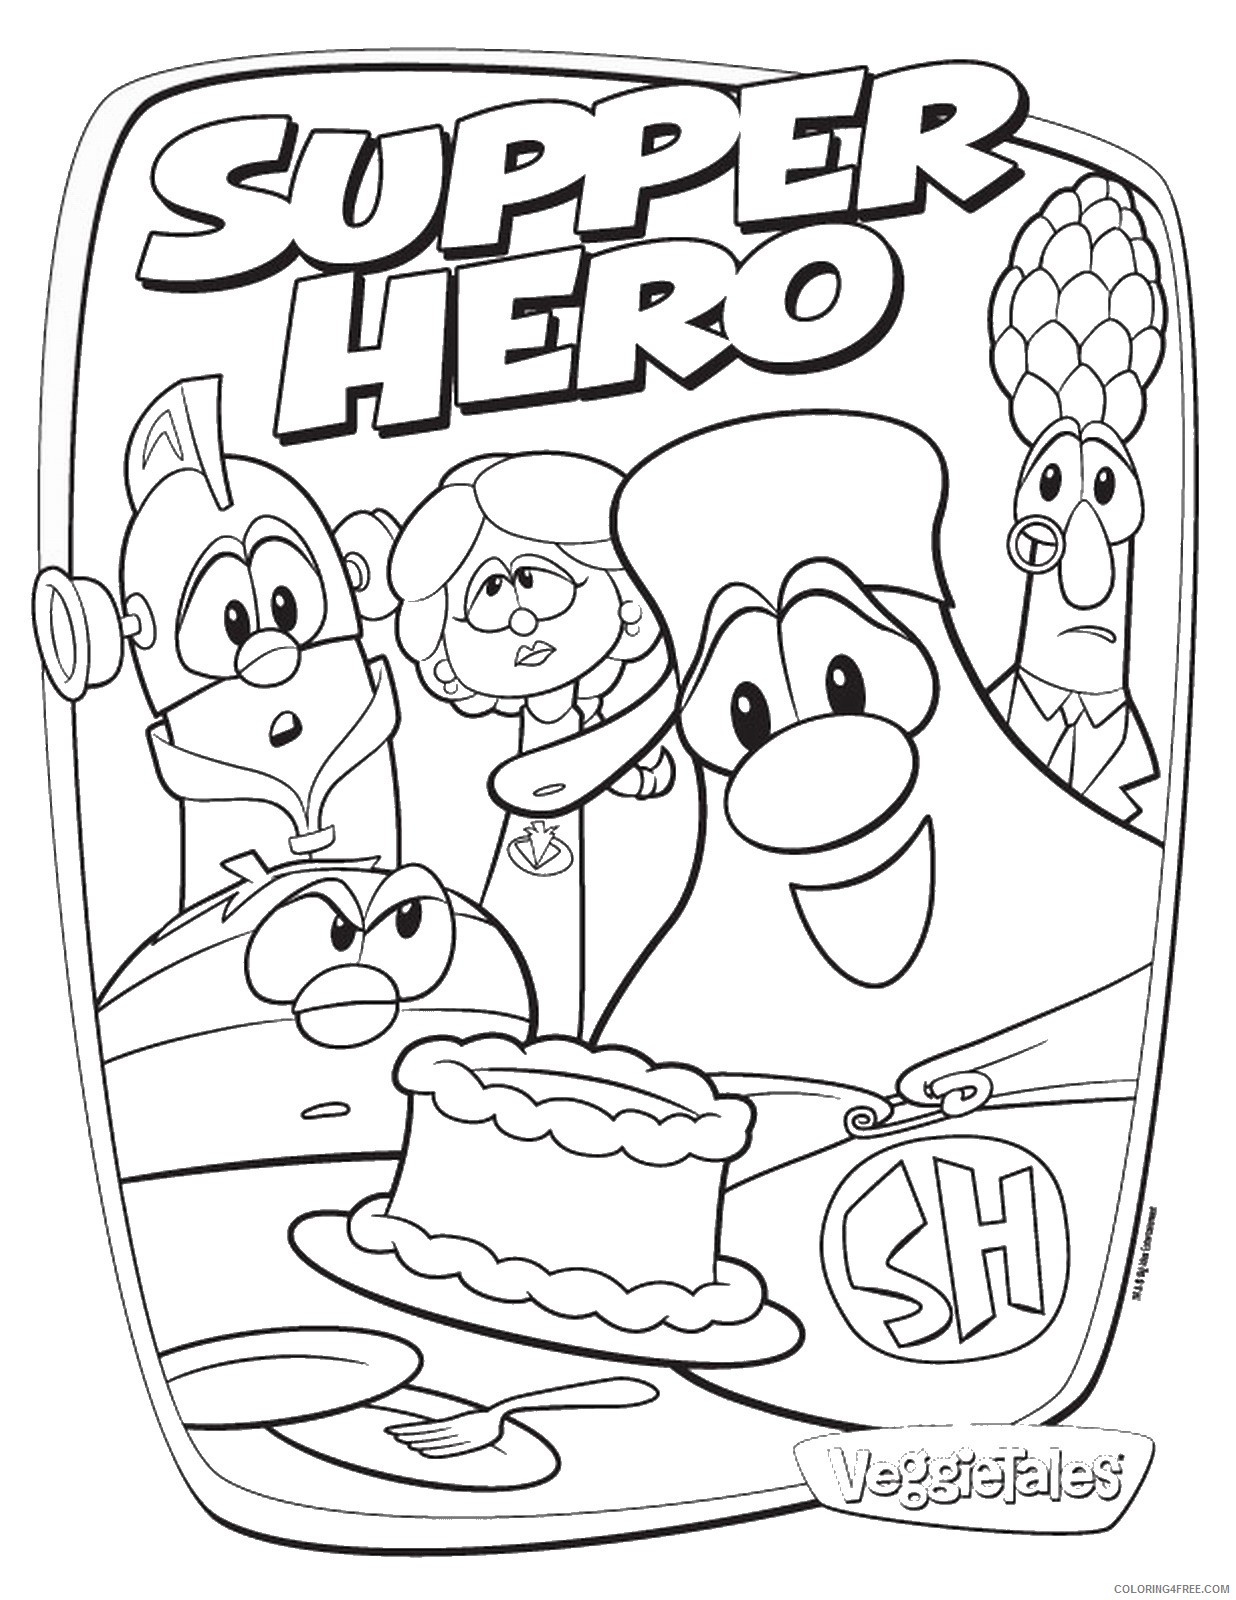 veggie tales coloring pages supper hero Coloring4free